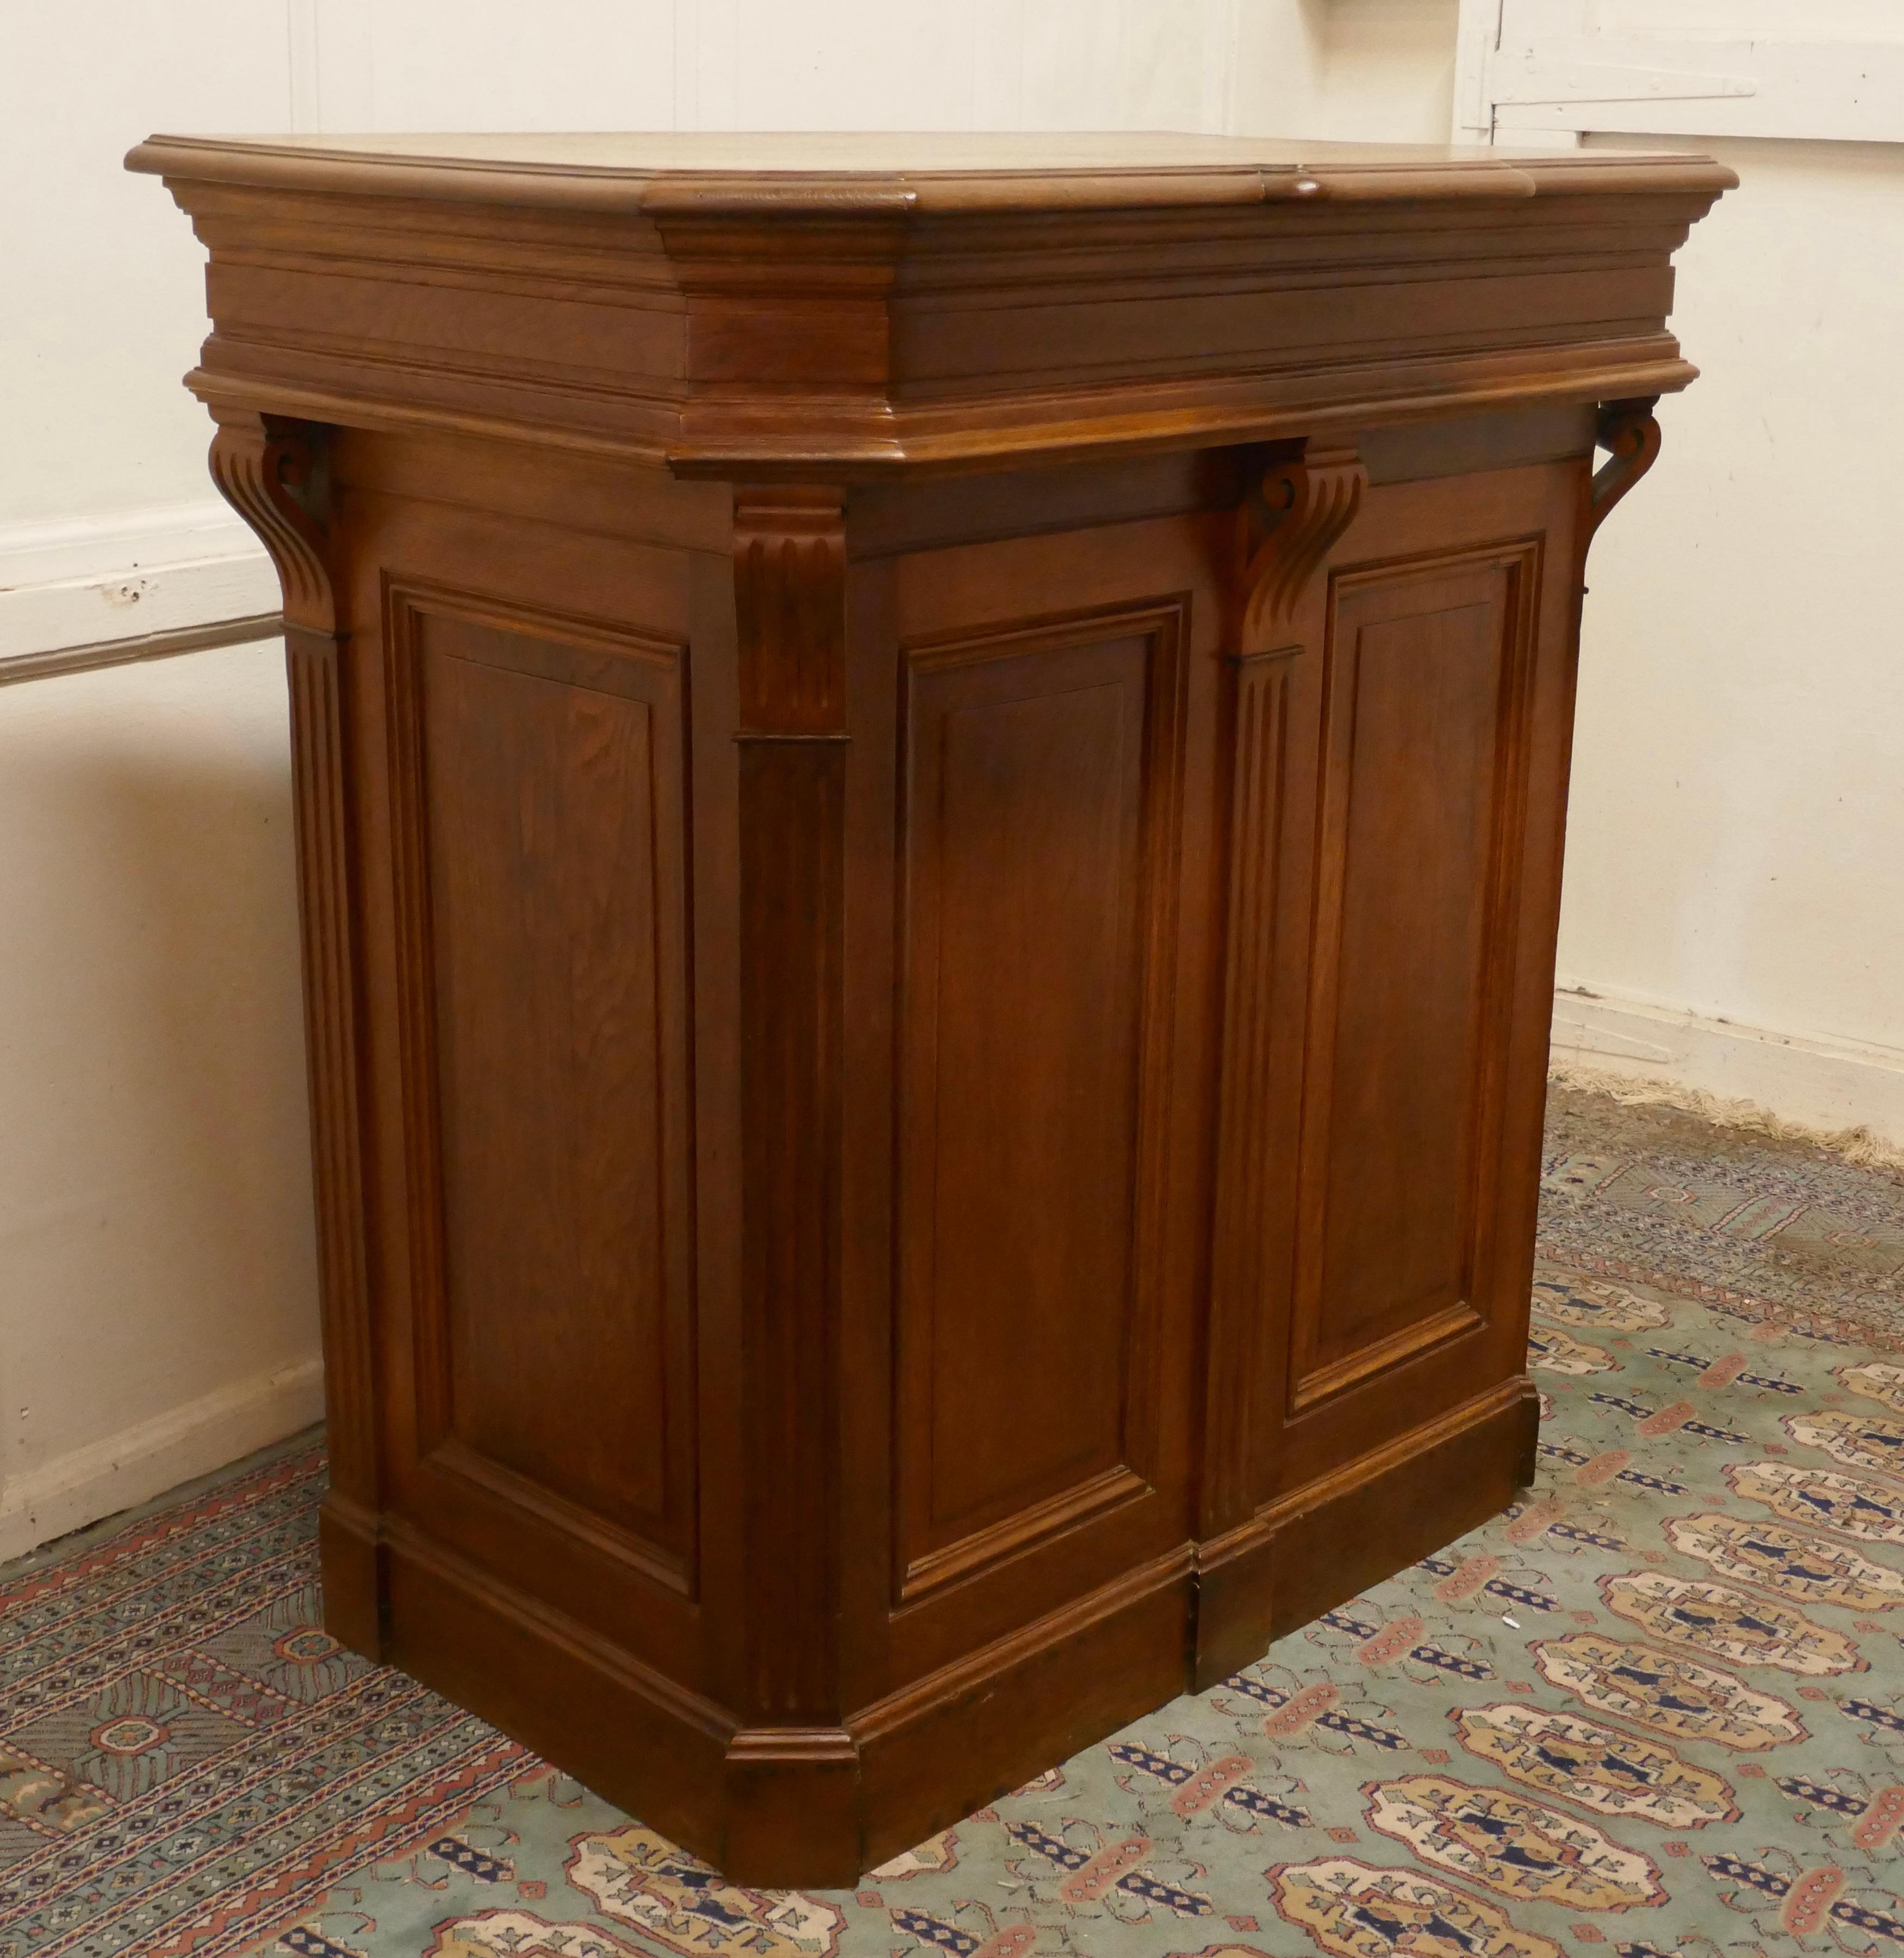 French oak hotel restaurant reception hostess greeting station, Greeter

An Original French Front of House Oak Greeter, the front and sides of the desk are panelled, 
At the reception side there is storage, some for tall Menus, a shelved